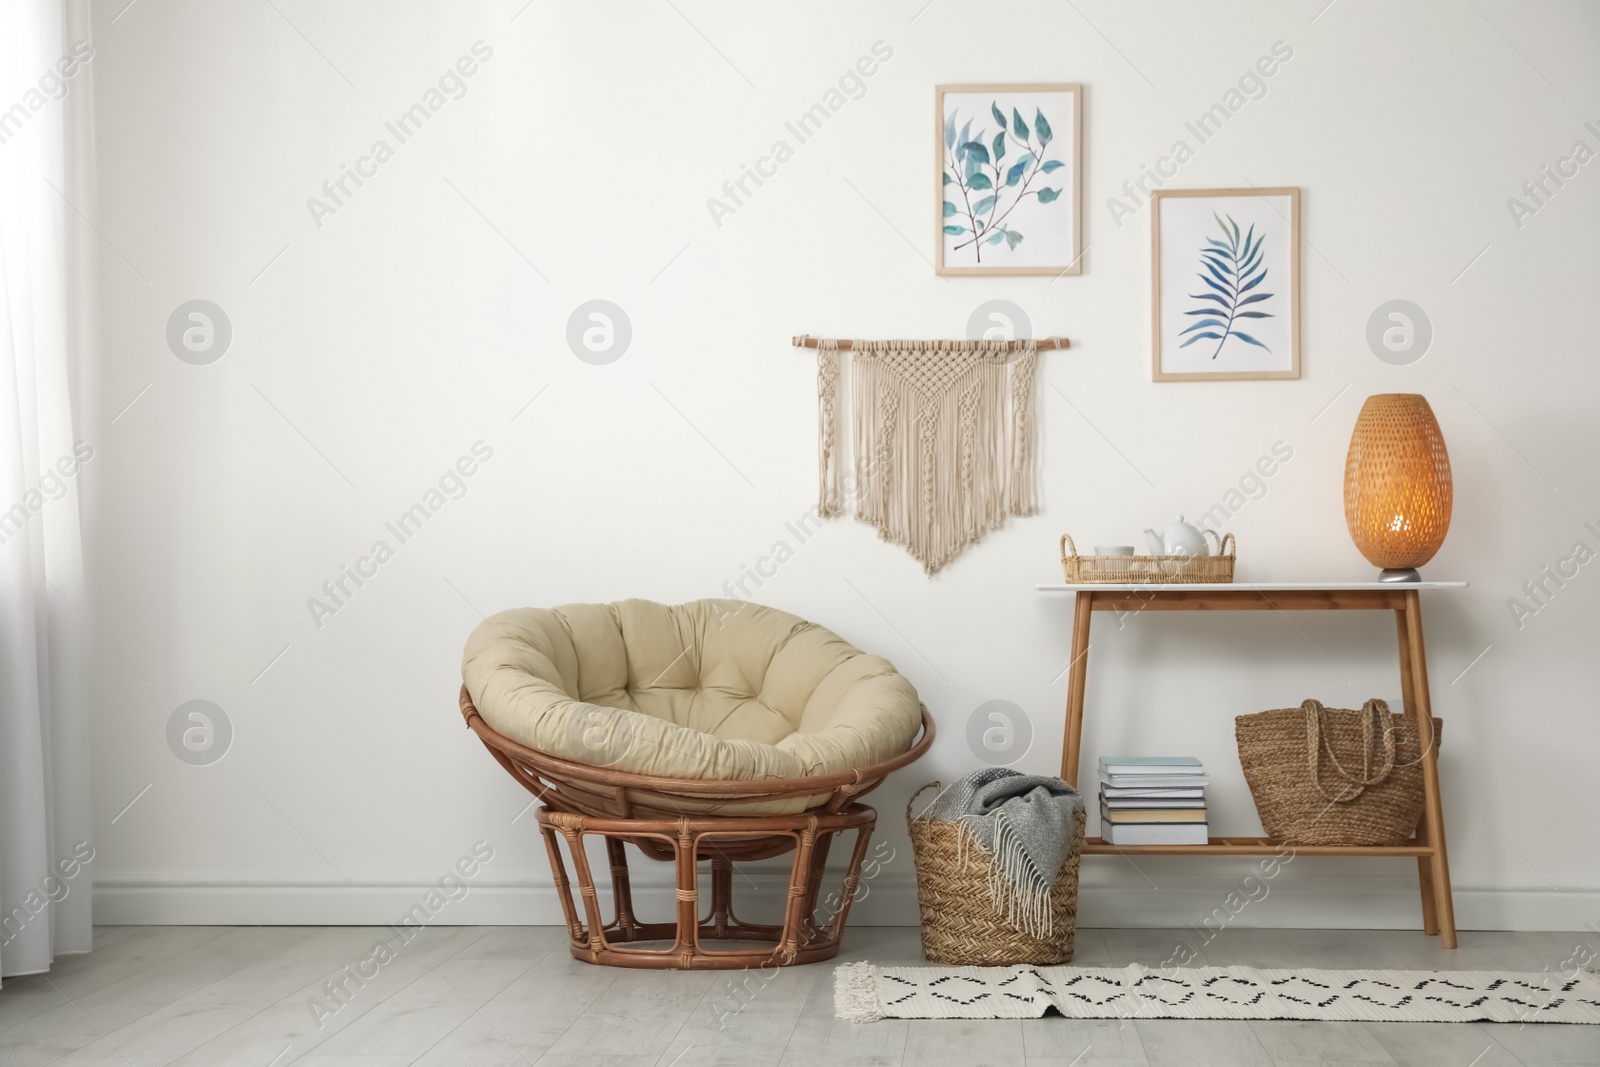 Photo of Living room interior design with comfortable papasan chair and wooden table